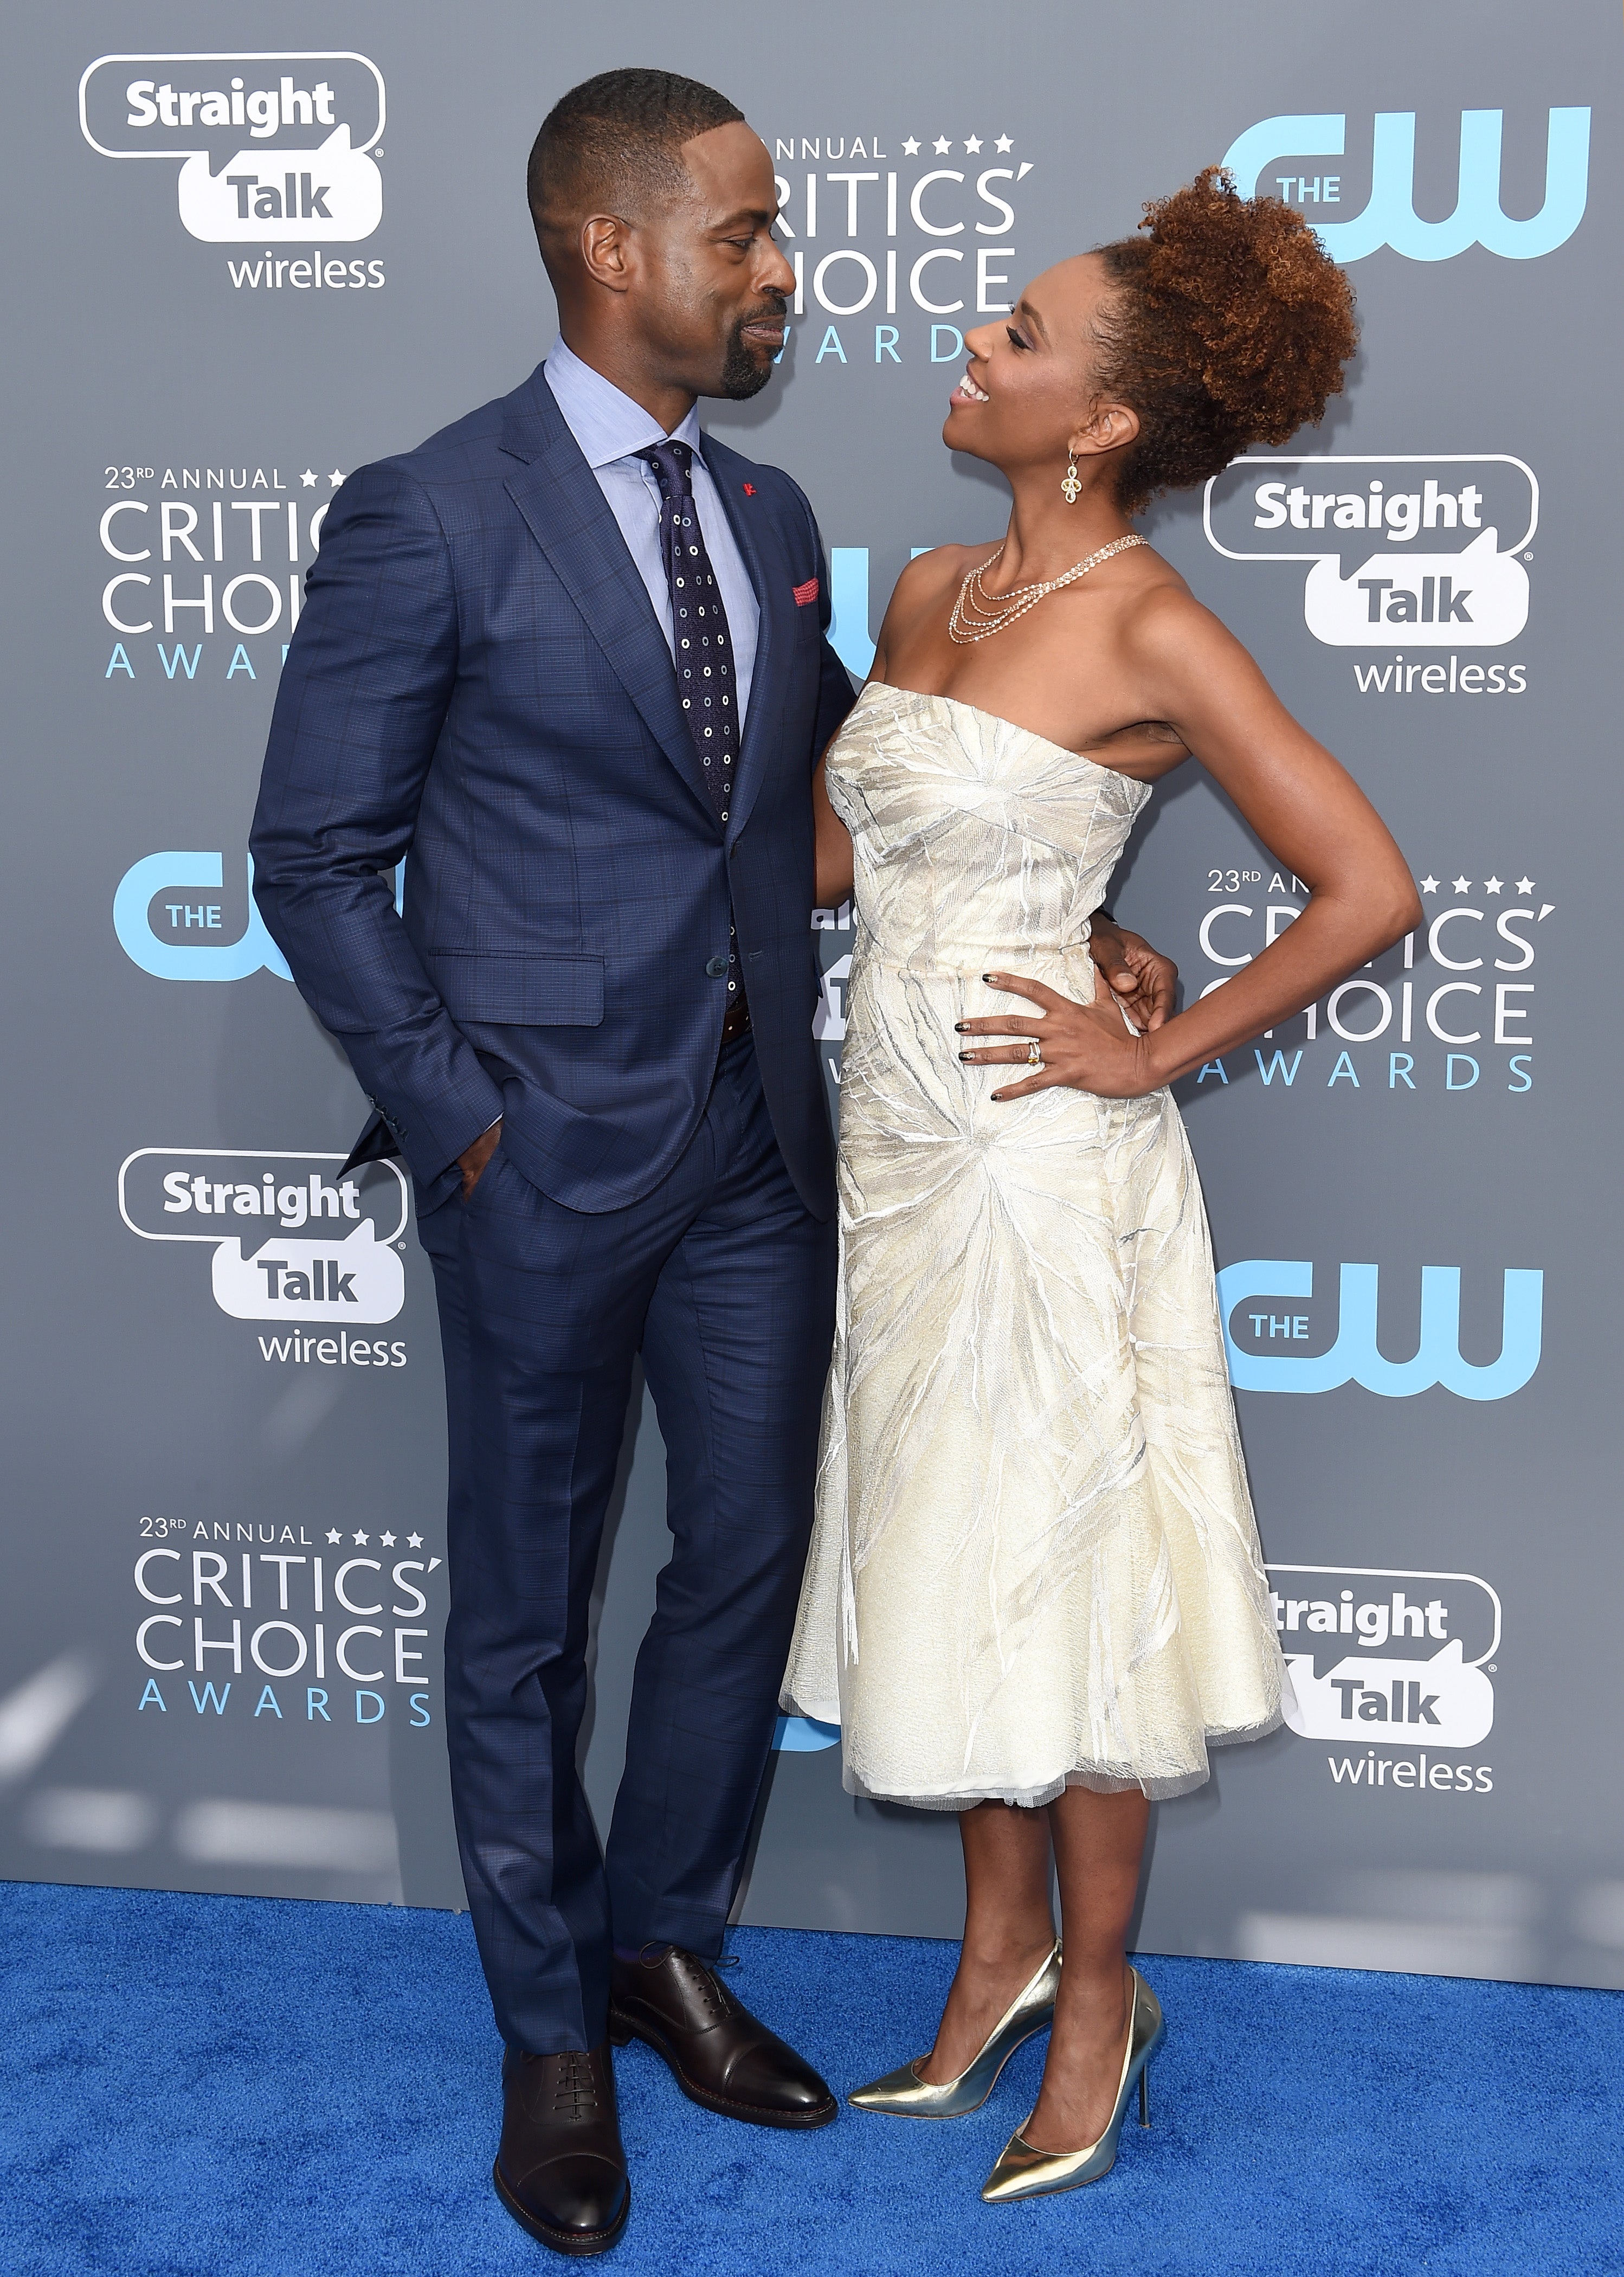 9 Beautiful Photos Of Sterling K. Brown and Wife Ryan Michelle Bathe Looking Madly In Love
